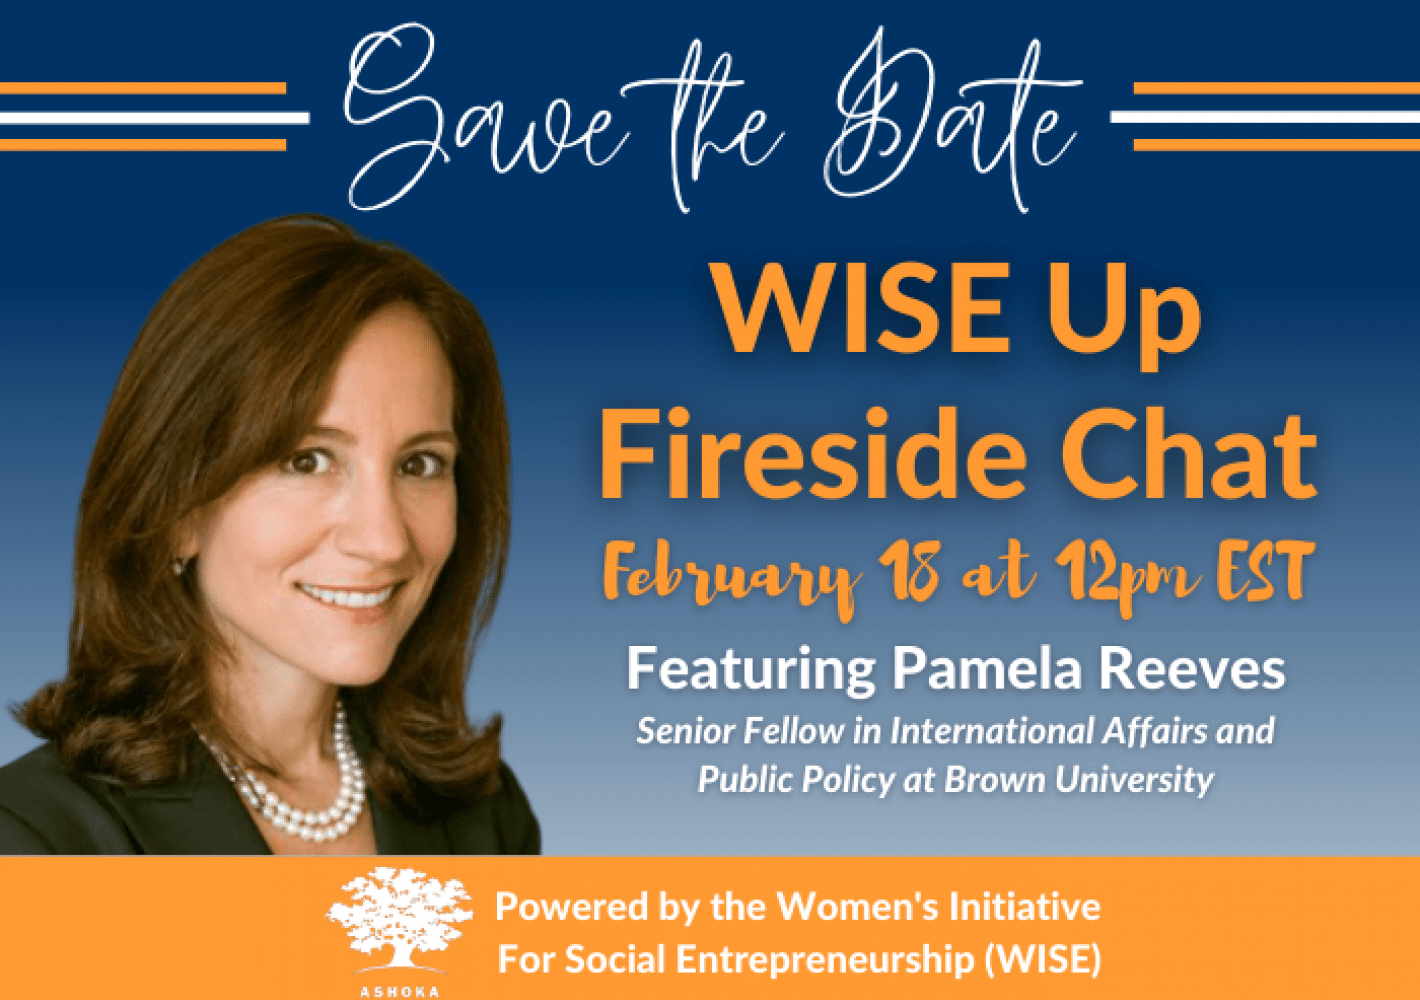 WISE Up Fireside Chat with Pamela Reeves